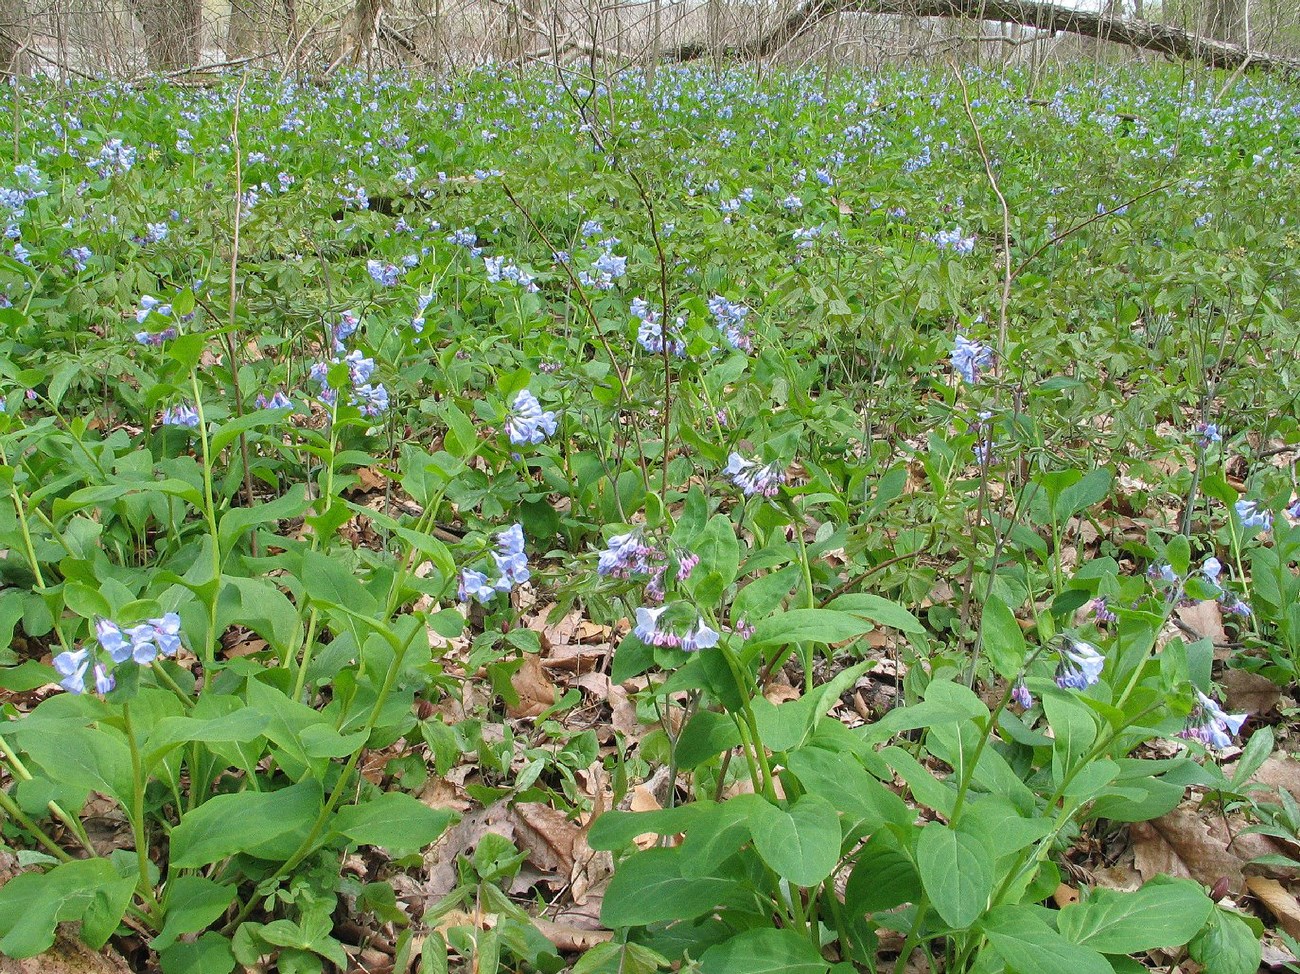 A Field of purple bell-shaped flowers with bright green leaves. This tree trunks are in the background.